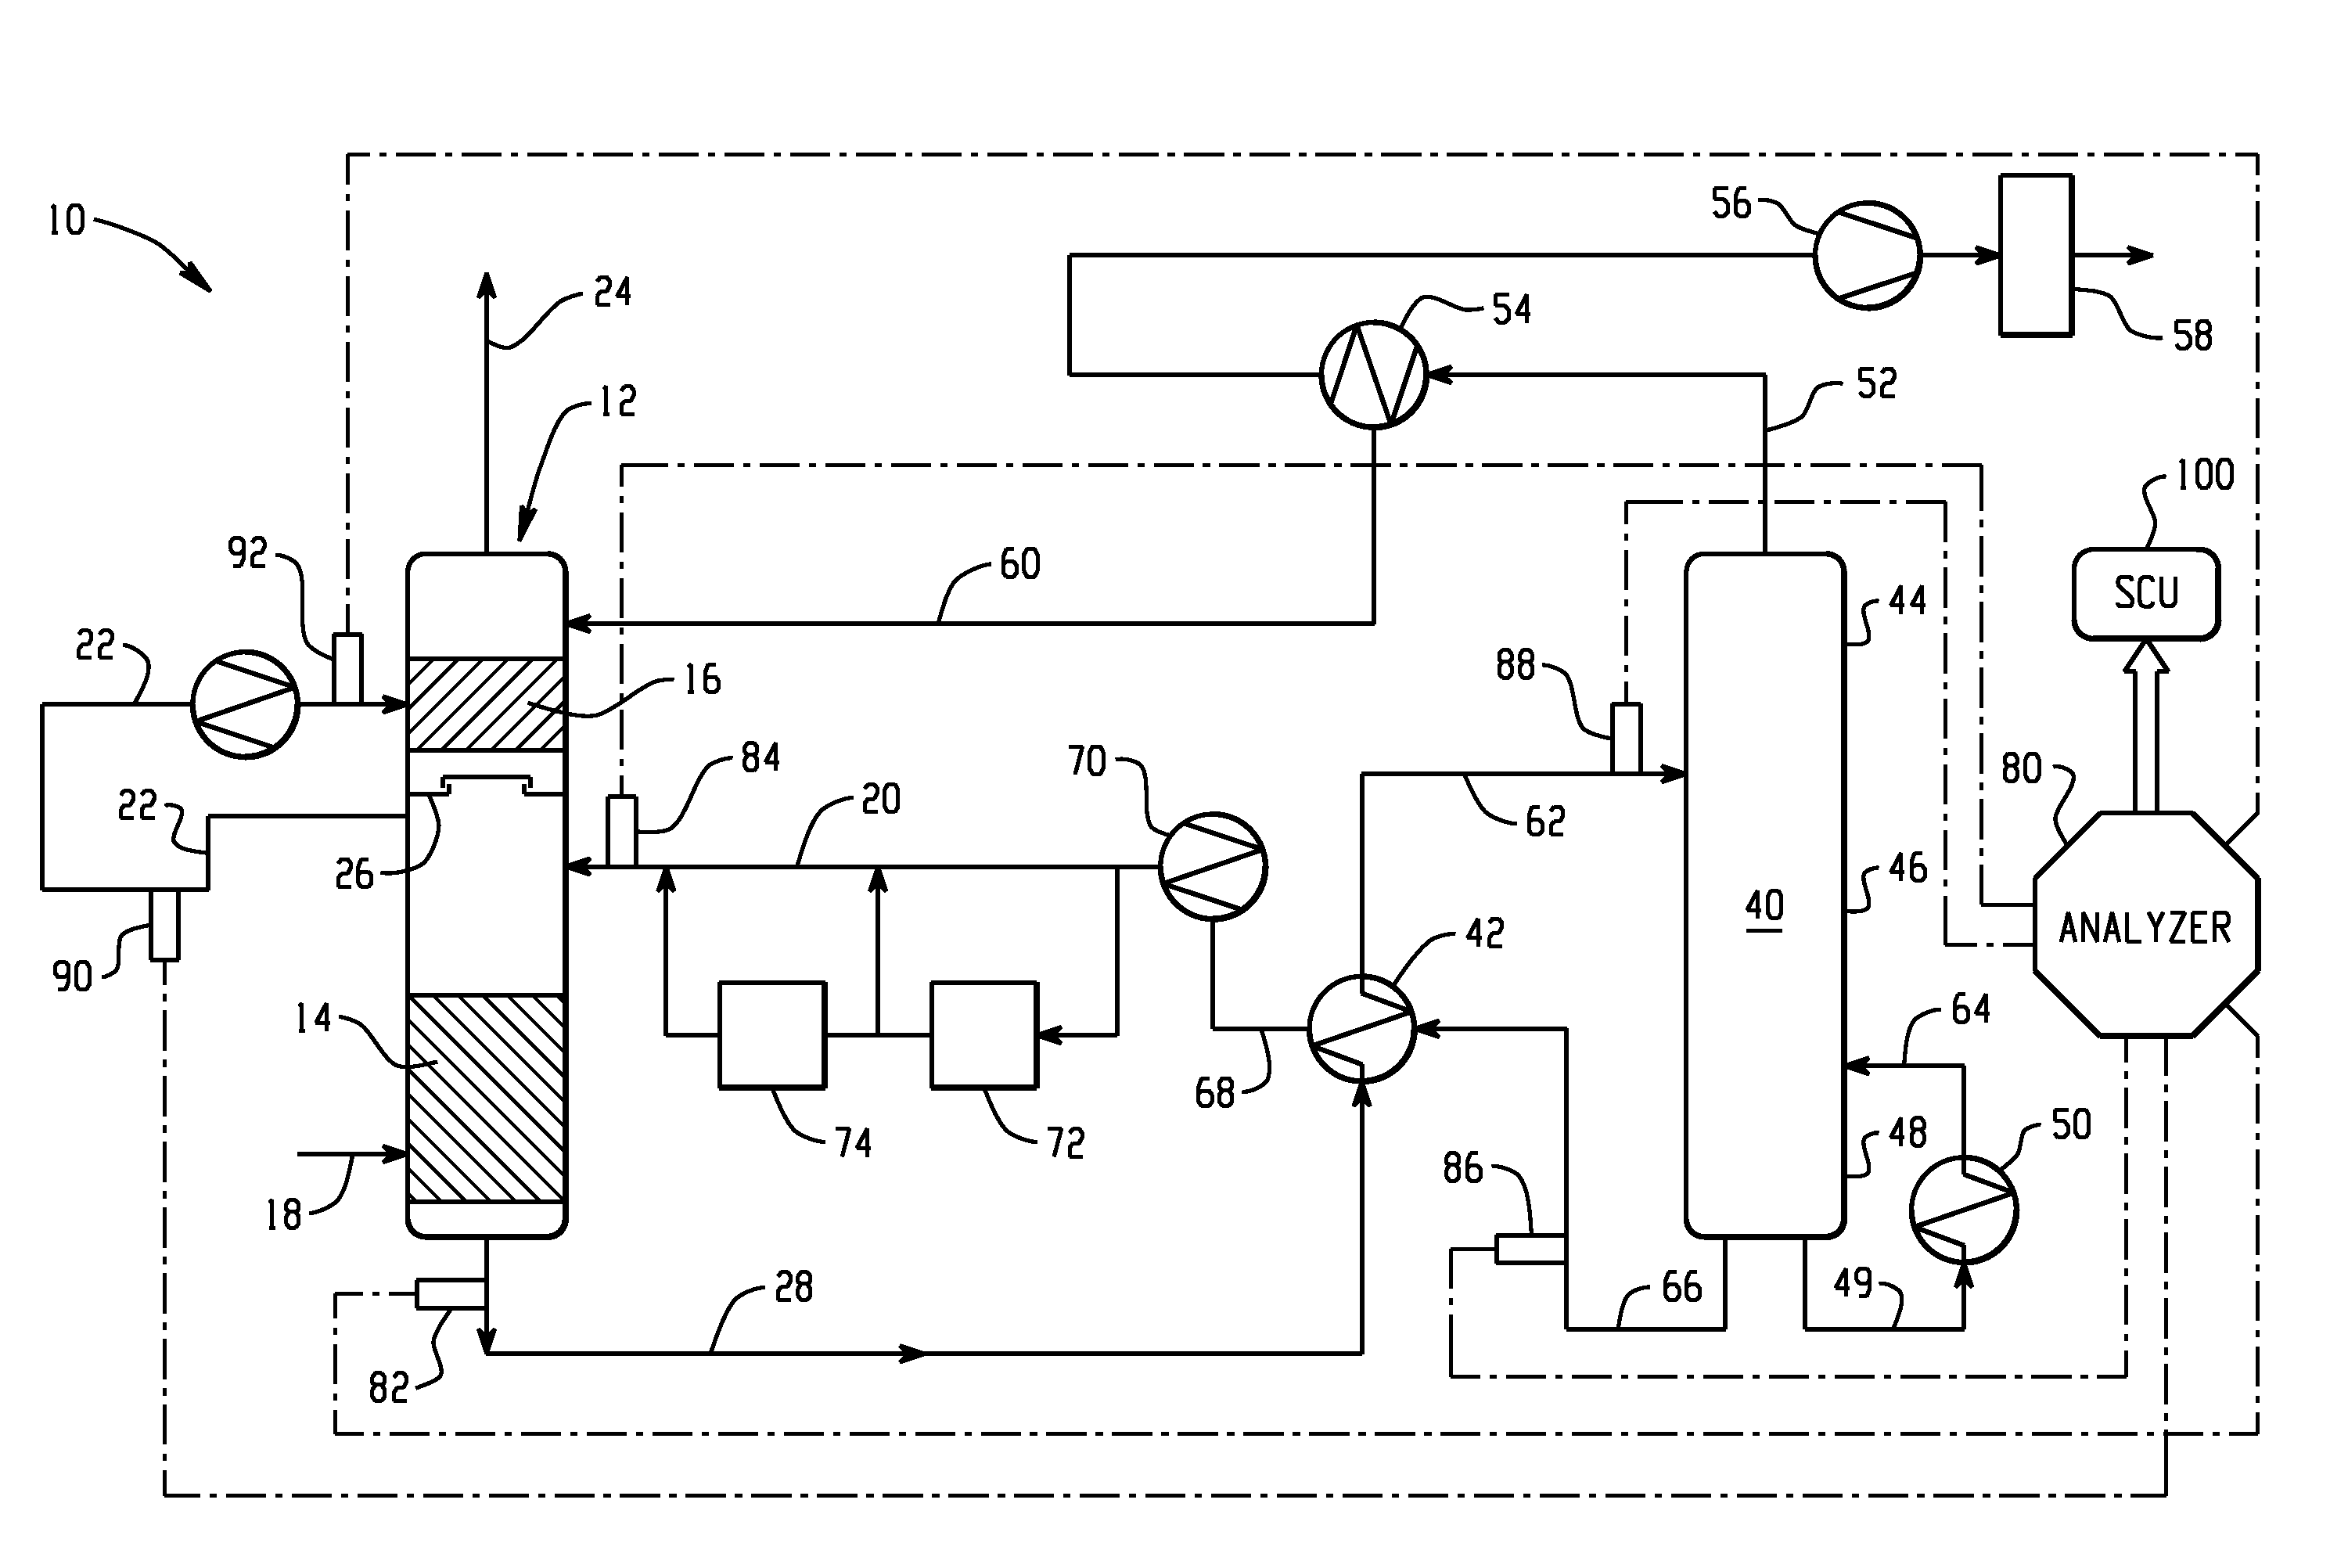 Real-time control method and gas purification system for solvent based capture systems